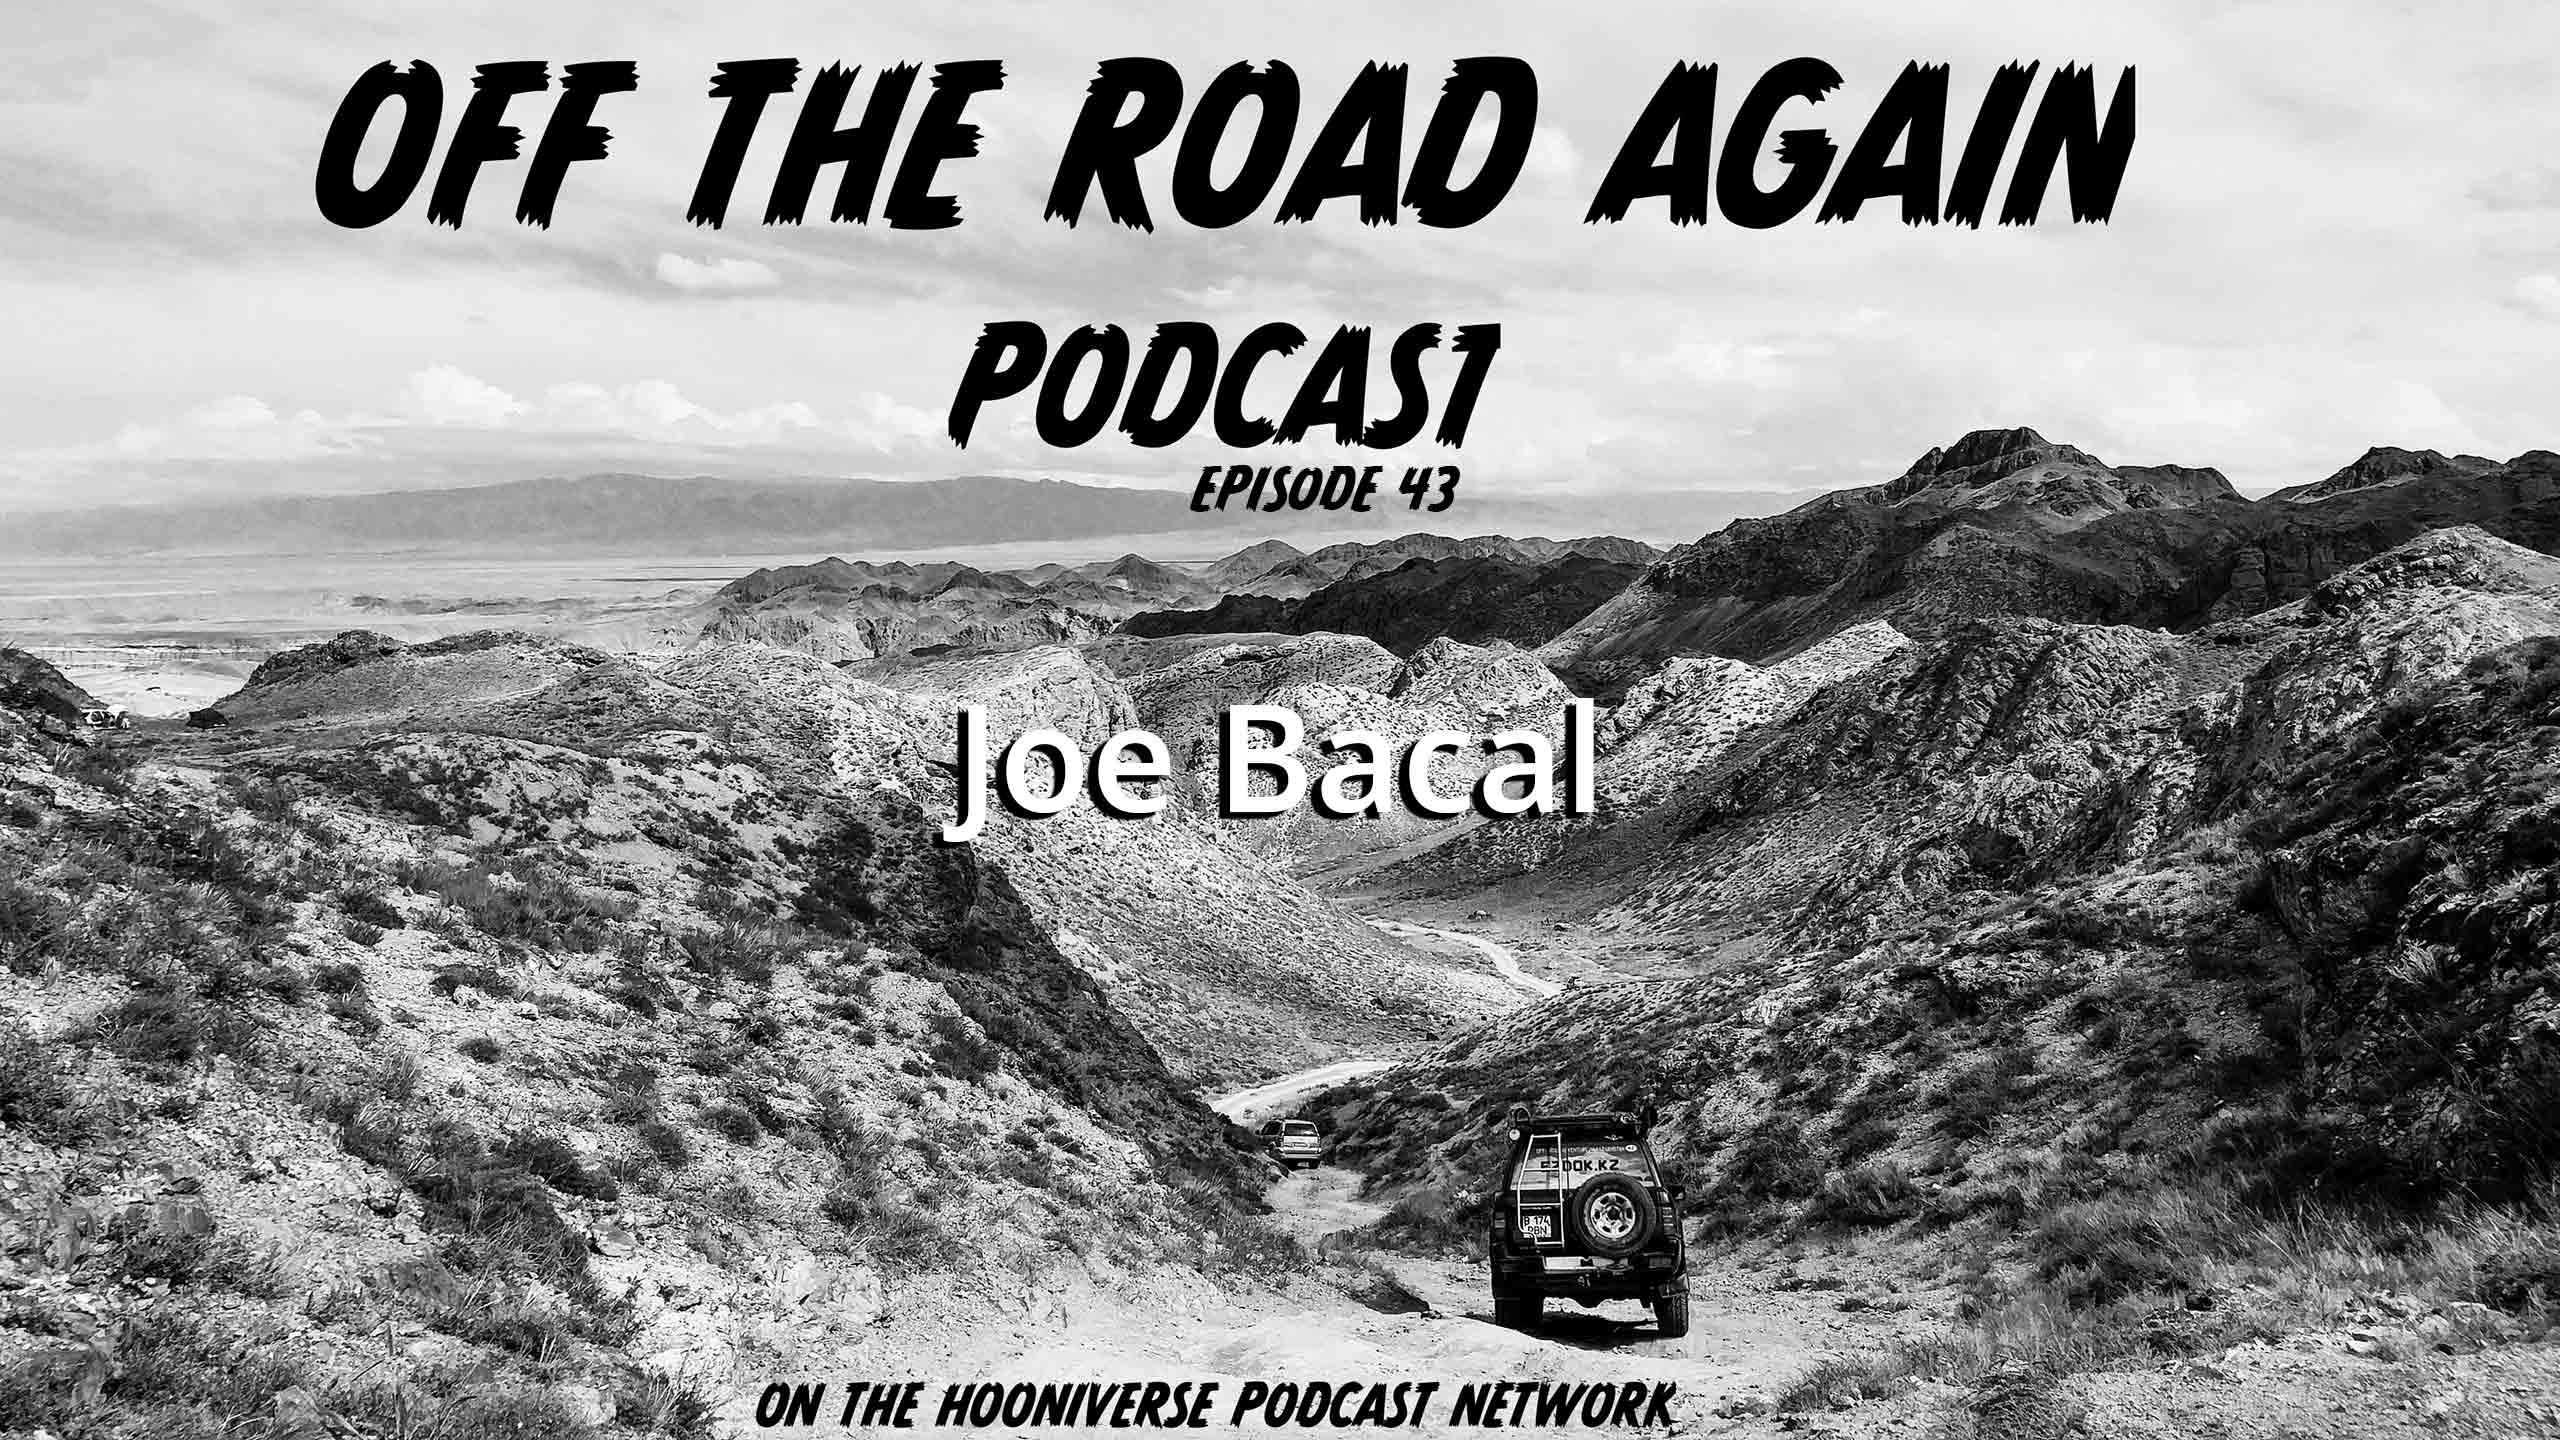 Joe-Bacal-Off-The-Road-Again-Podcast-Episode-43